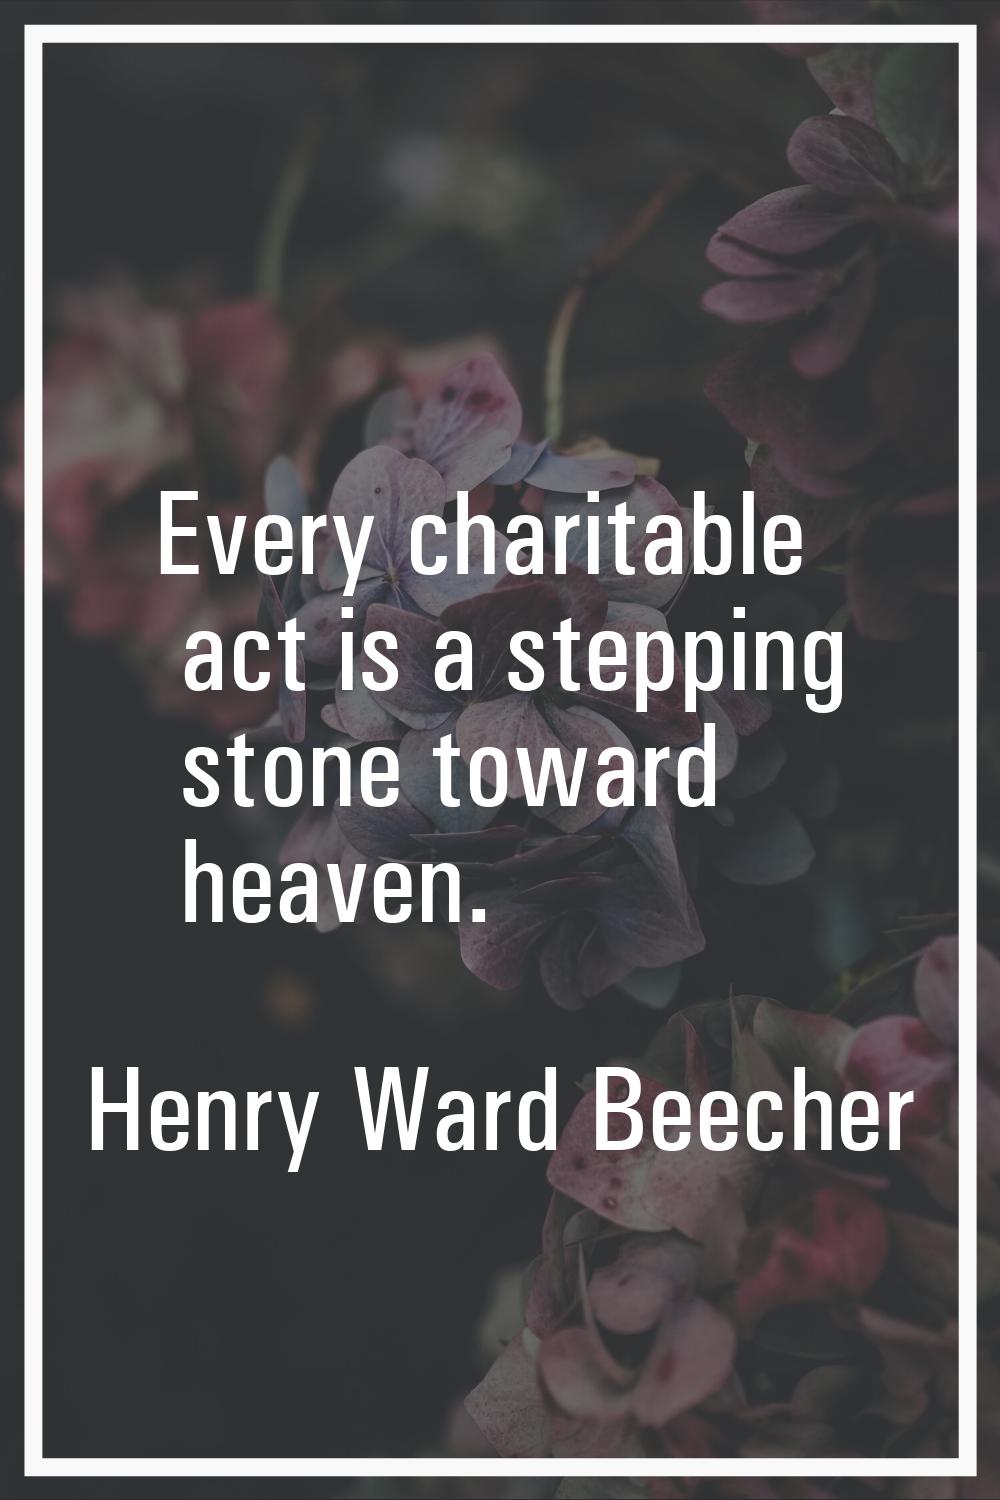 Every charitable act is a stepping stone toward heaven.